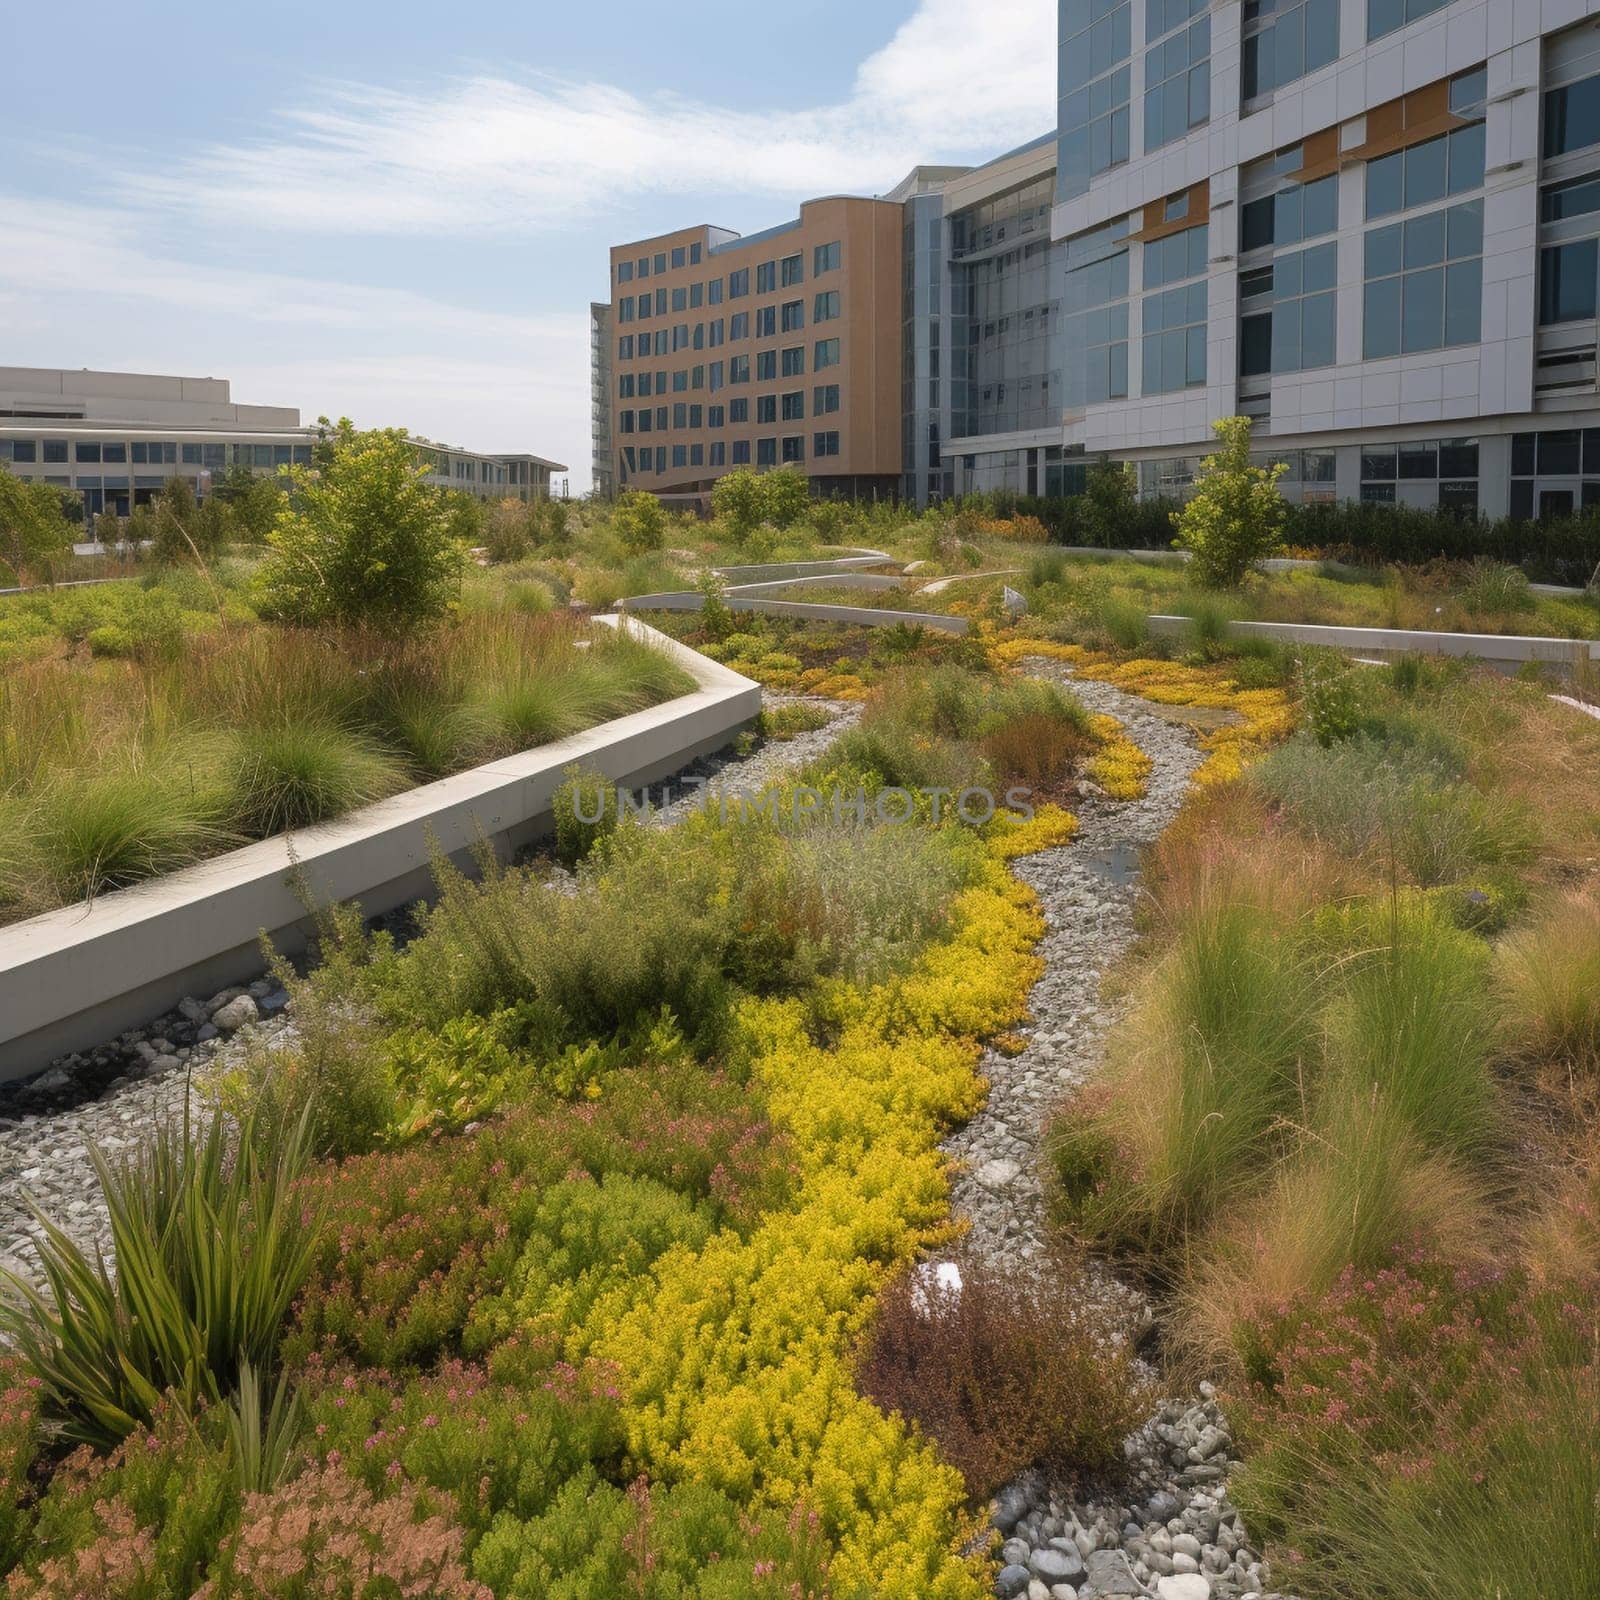 This image depicts a green infrastructure project such as a green roof or rain garden. It highlights the role of green infrastructure in reducing stormwater runoff and preserving water resources. Green infrastructure is a natural and sustainable approach to managing stormwater that involves using vegetation, soil, and other natural materials to absorb and filter rainwater. This approach can reduce the amount of stormwater runoff, improve water quality, and enhance the beauty and function of urban and suburban landscapes. This image represents the potential for green infrastructure to promote water conservation and sustainability in both residential and commercial settings.